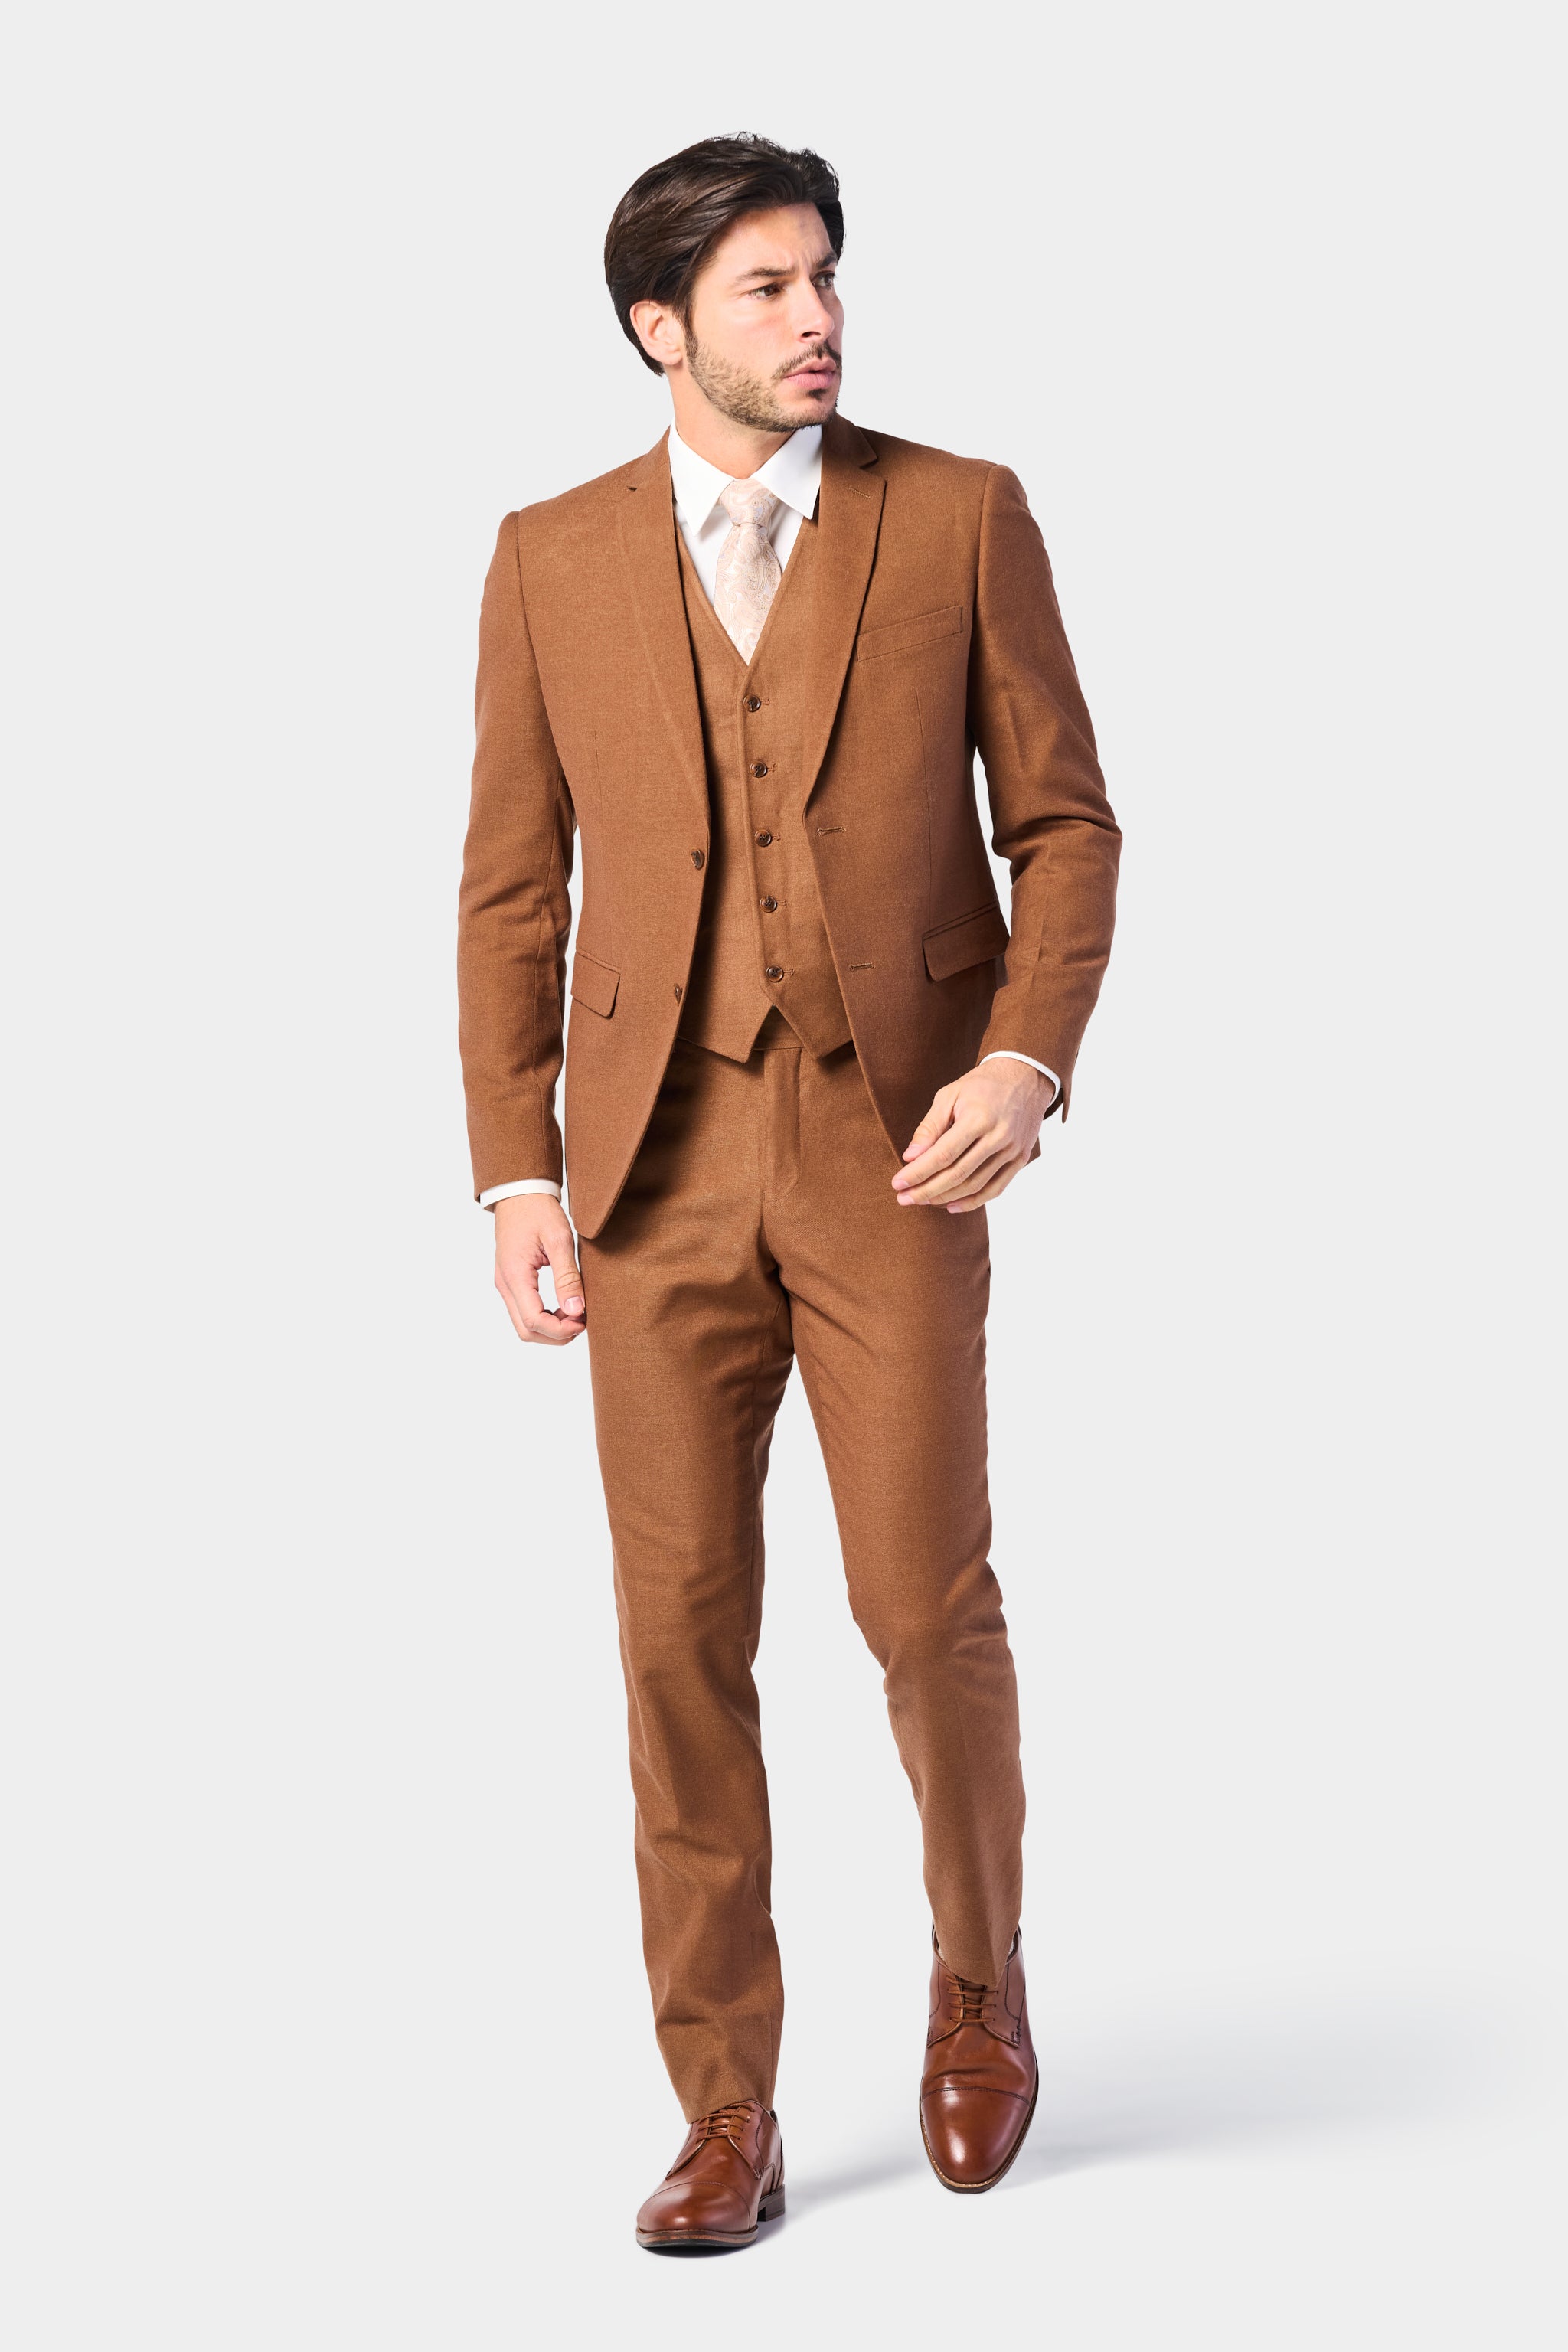 Brown Tie with Burgundy Pants Outfits For Men In Their 30s (4 ideas &  outfits)